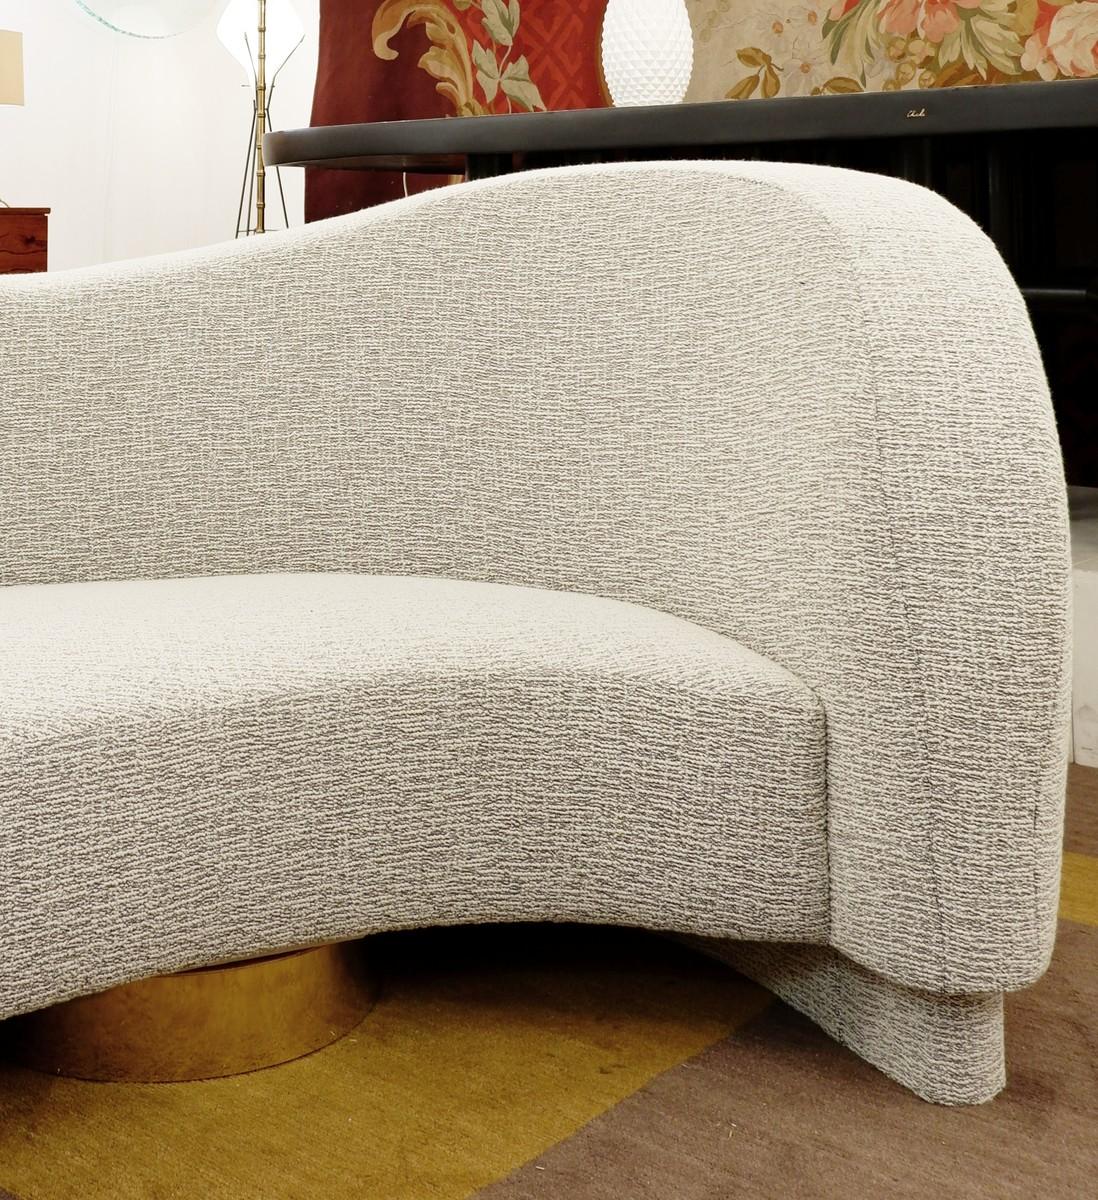 Wave Curved "Borne" Sofa, Italy For Sale at 1stDibs